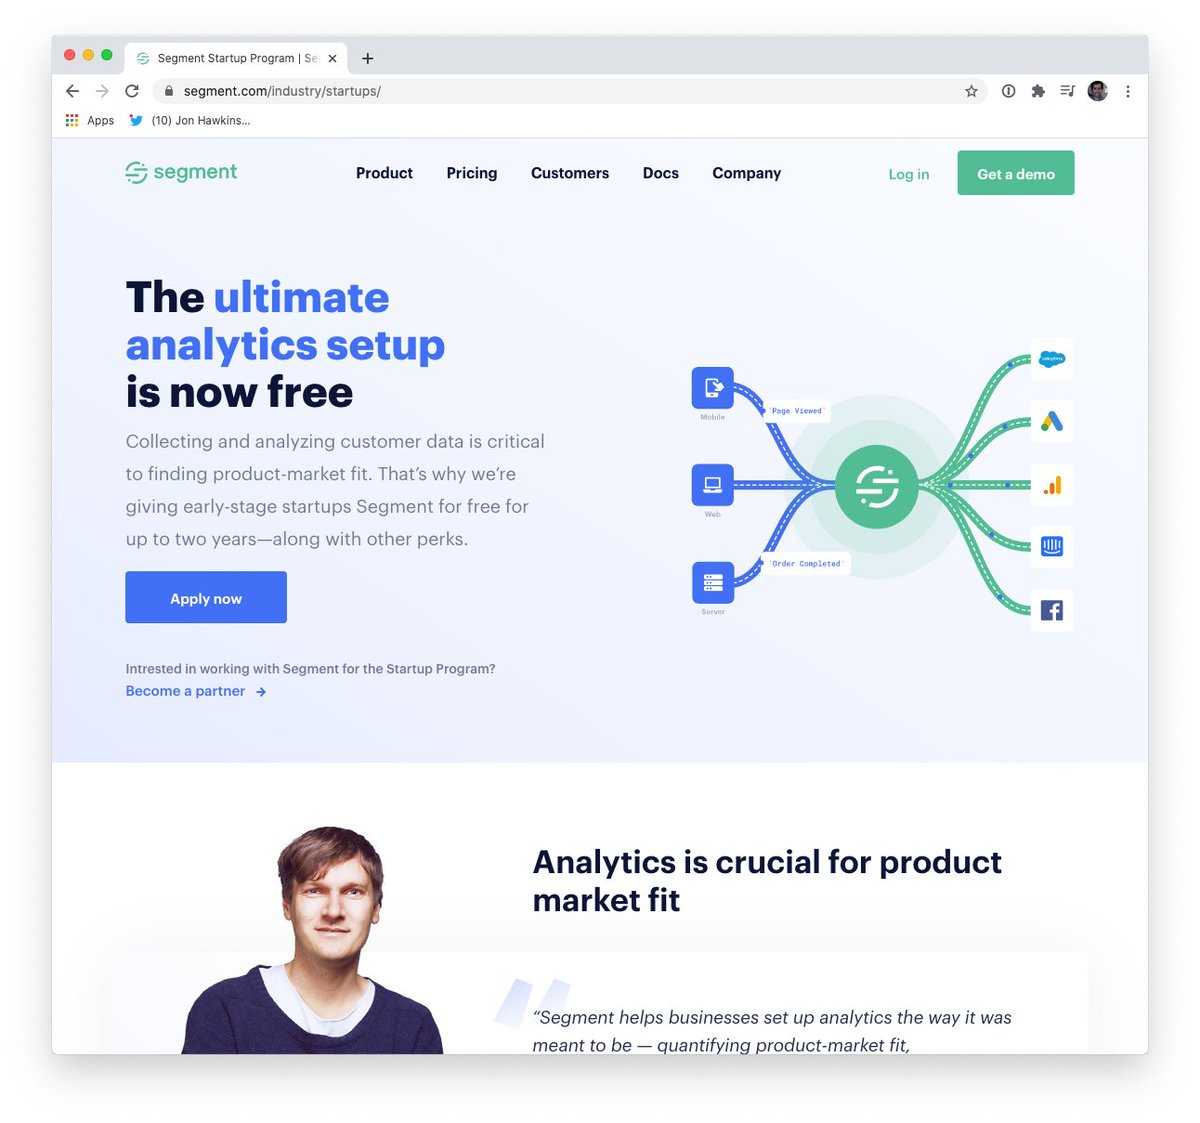 2019: we launch our startup program: free Segment, free analytics+messaging stack, and YC growth bootcamps; this program has since provided analytics stacks to 10,000+ startups for free :)